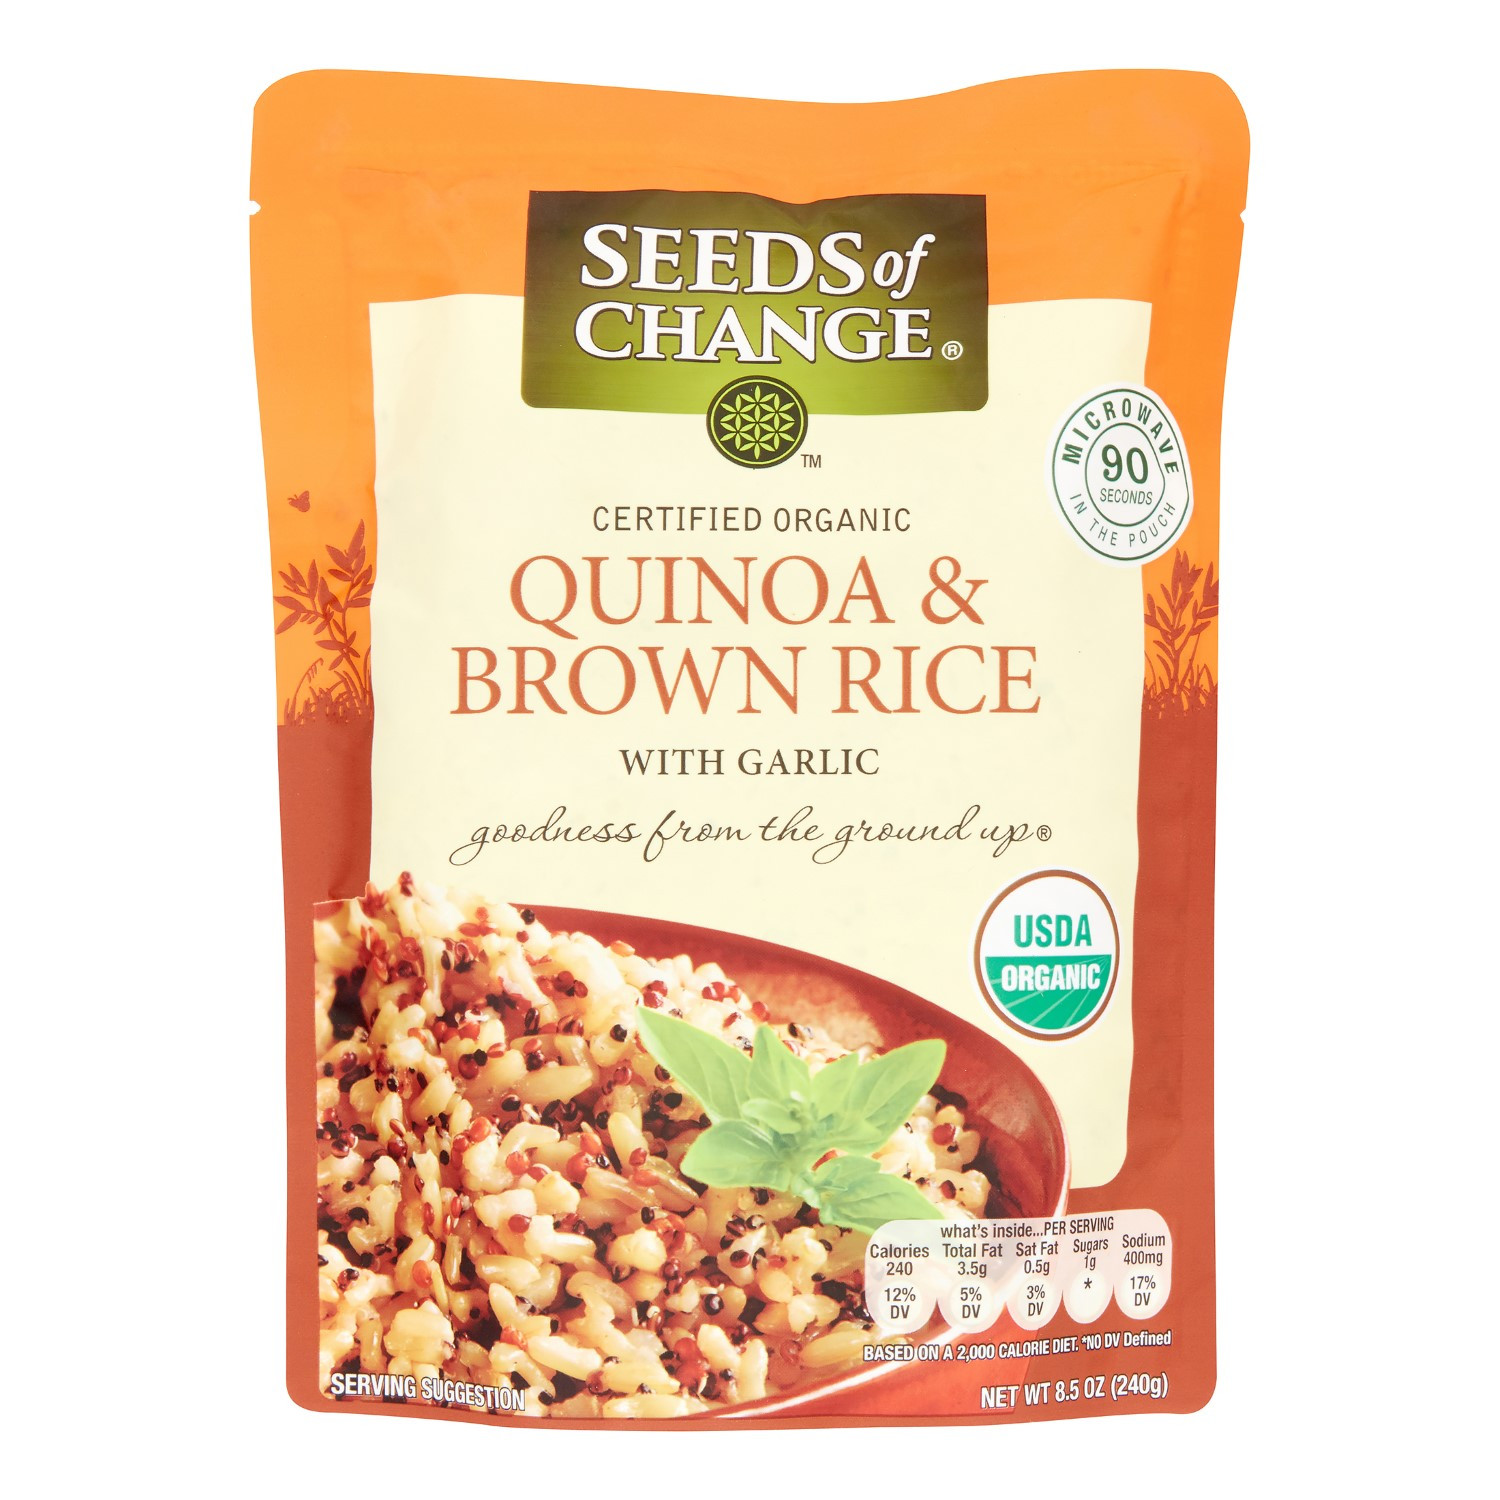 Seeds Of Change Quinoa And Brown Rice Gluten Free
 Seeds of Change Seeds of Change Microwavable Quinoa and